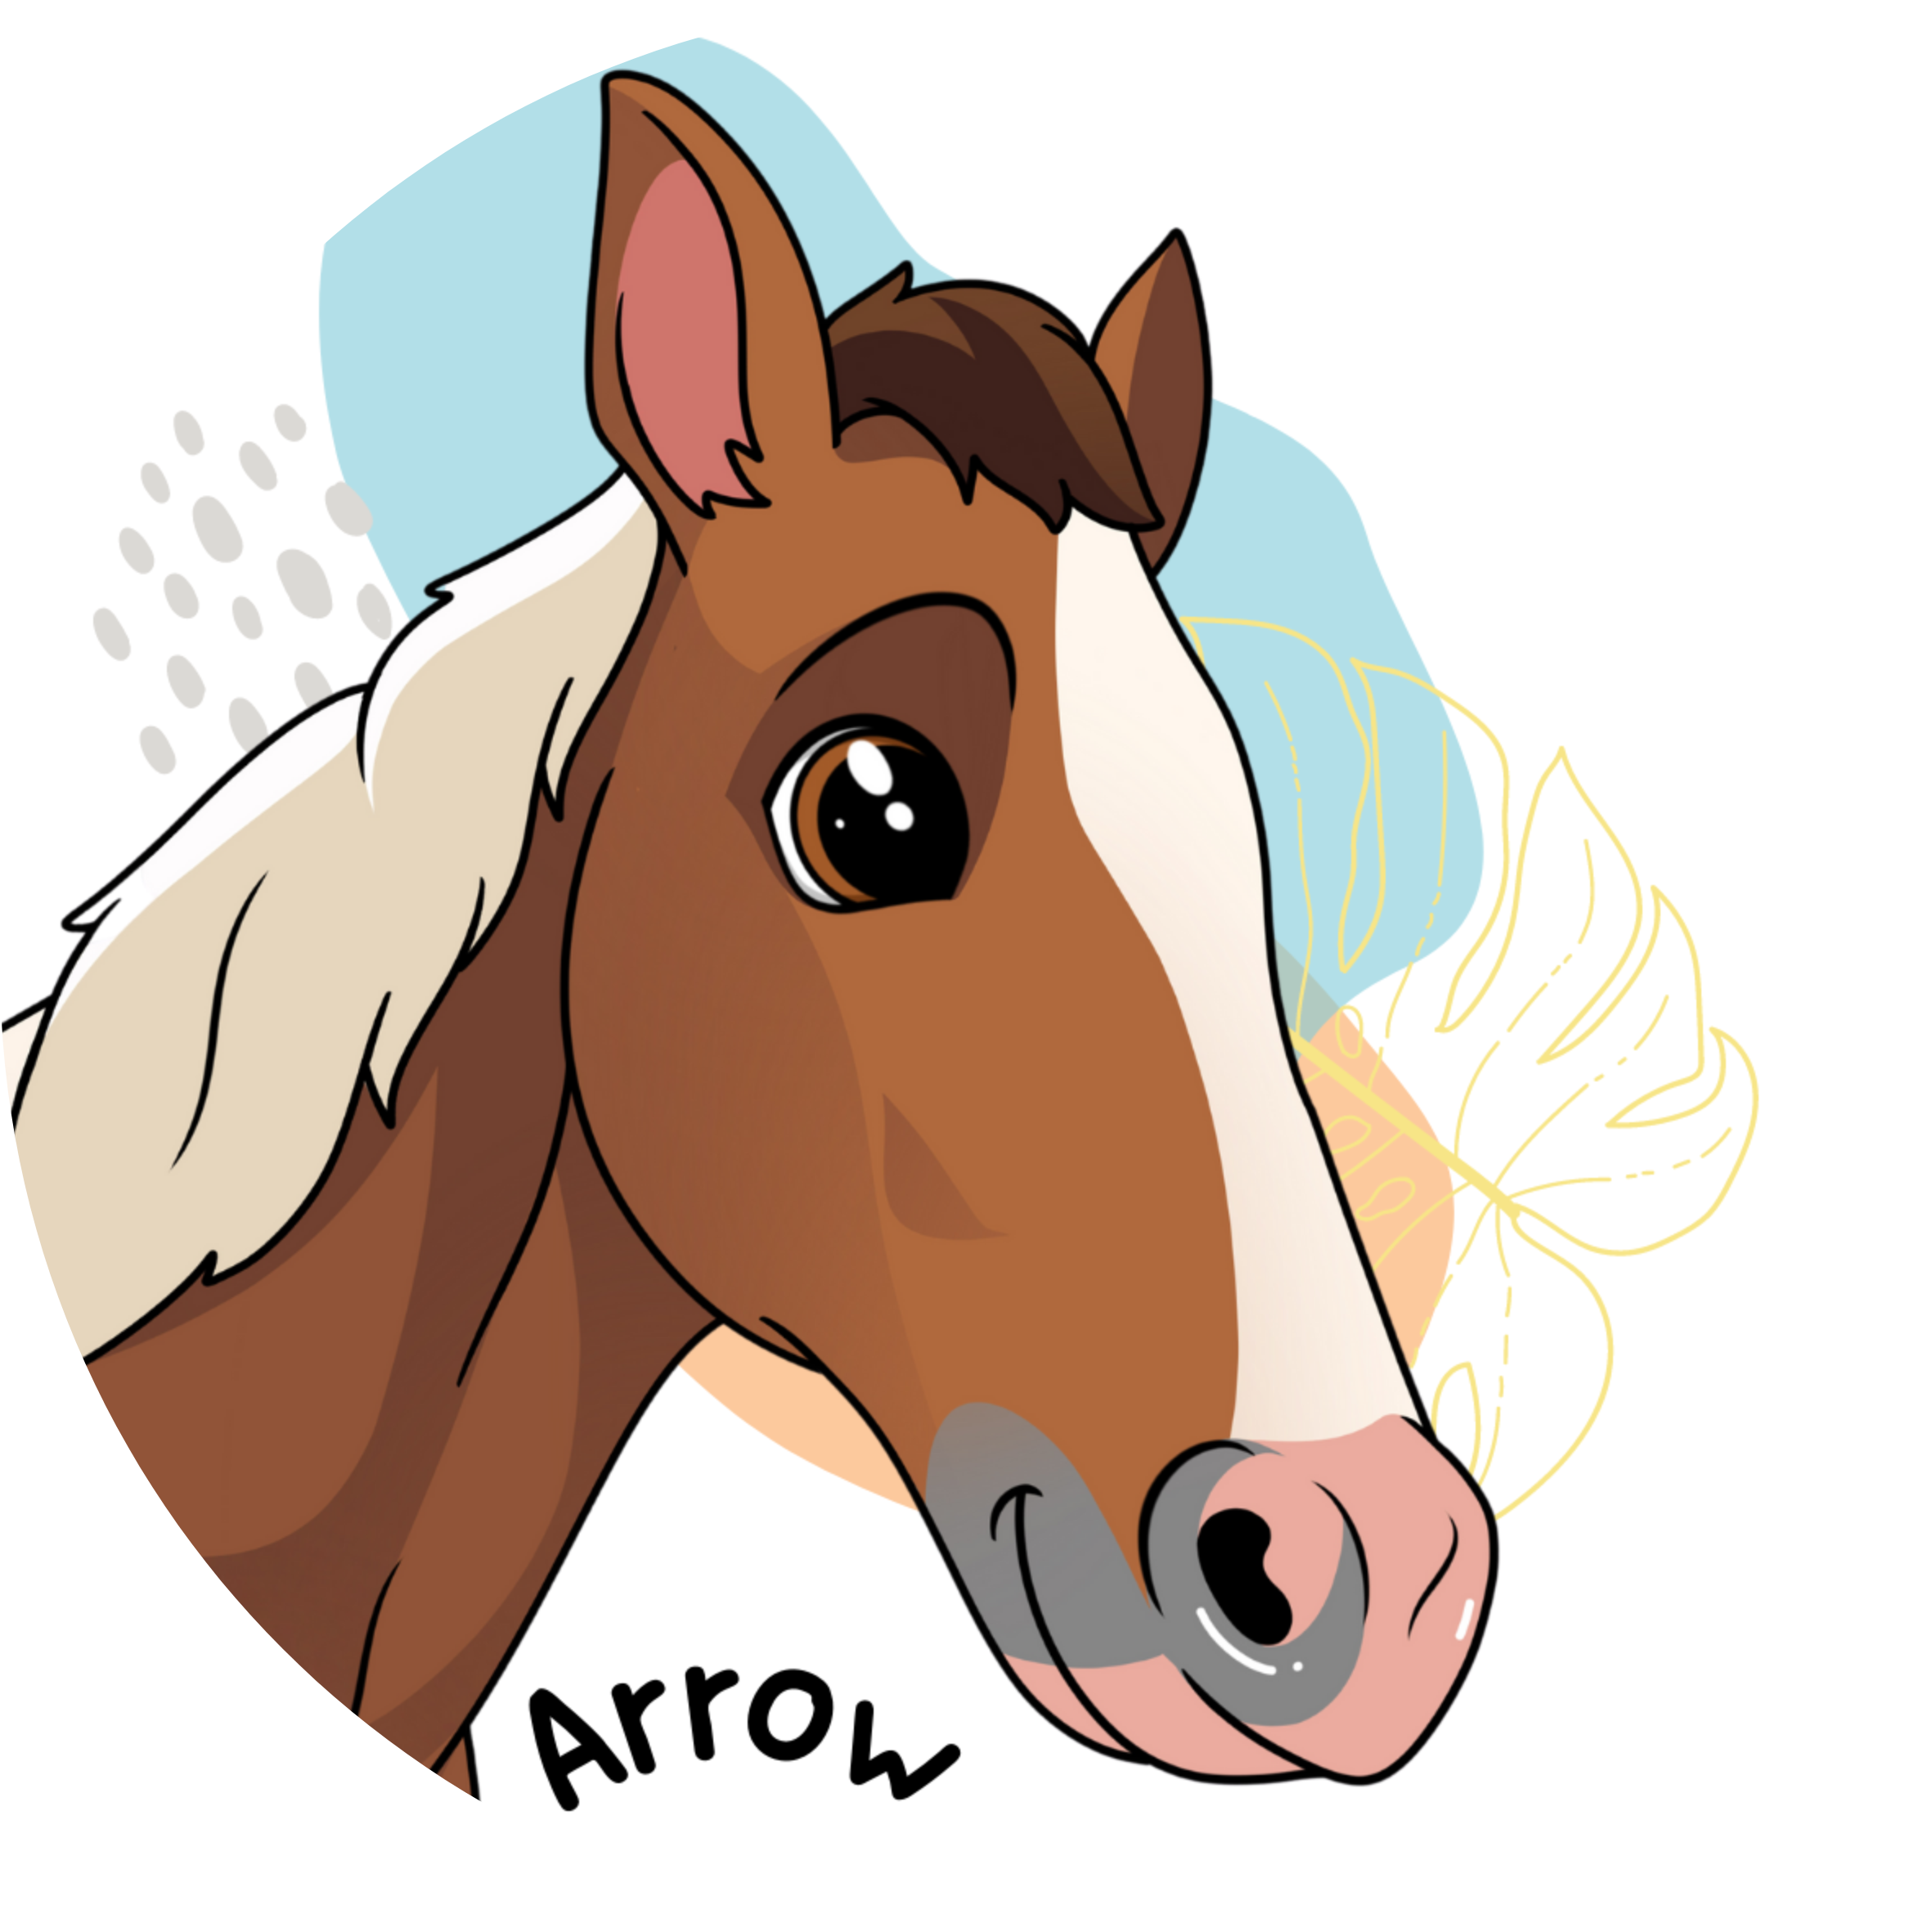 Arrow - Horse sticker .png large.png